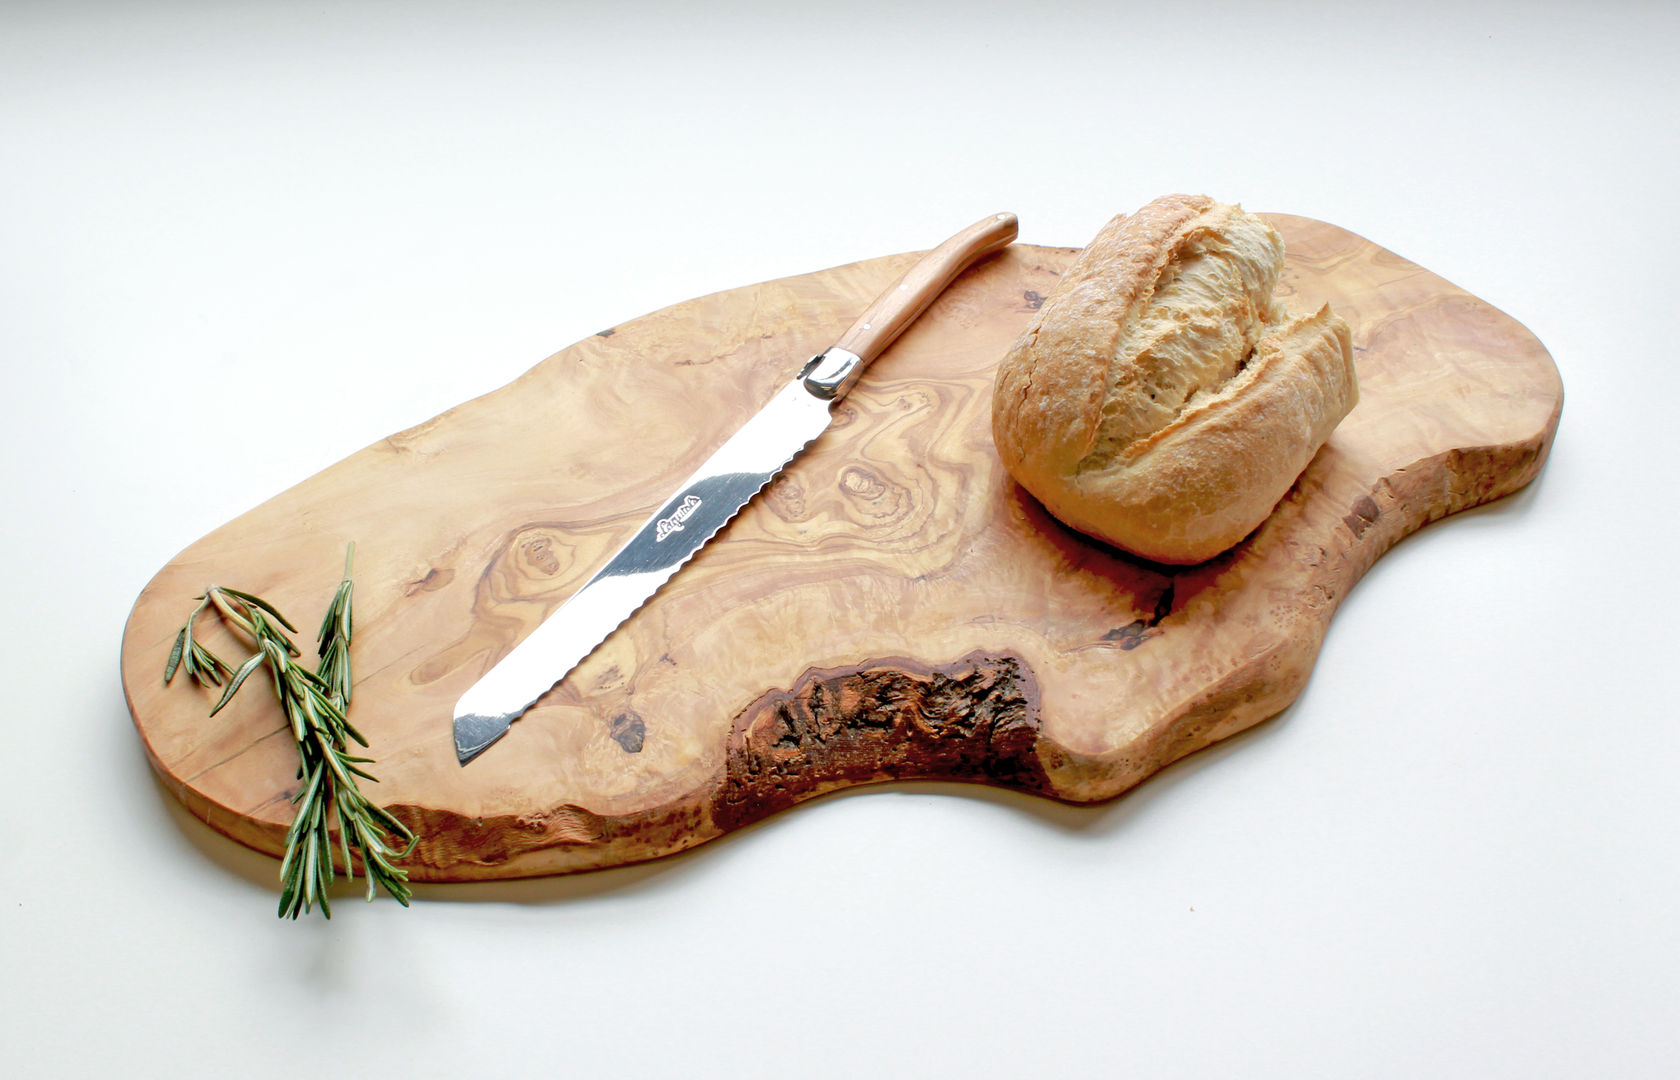 Large Rustic Olive Wood Serving Board, The Rustic Dish The Rustic Dish Kitchen Kitchen utensils